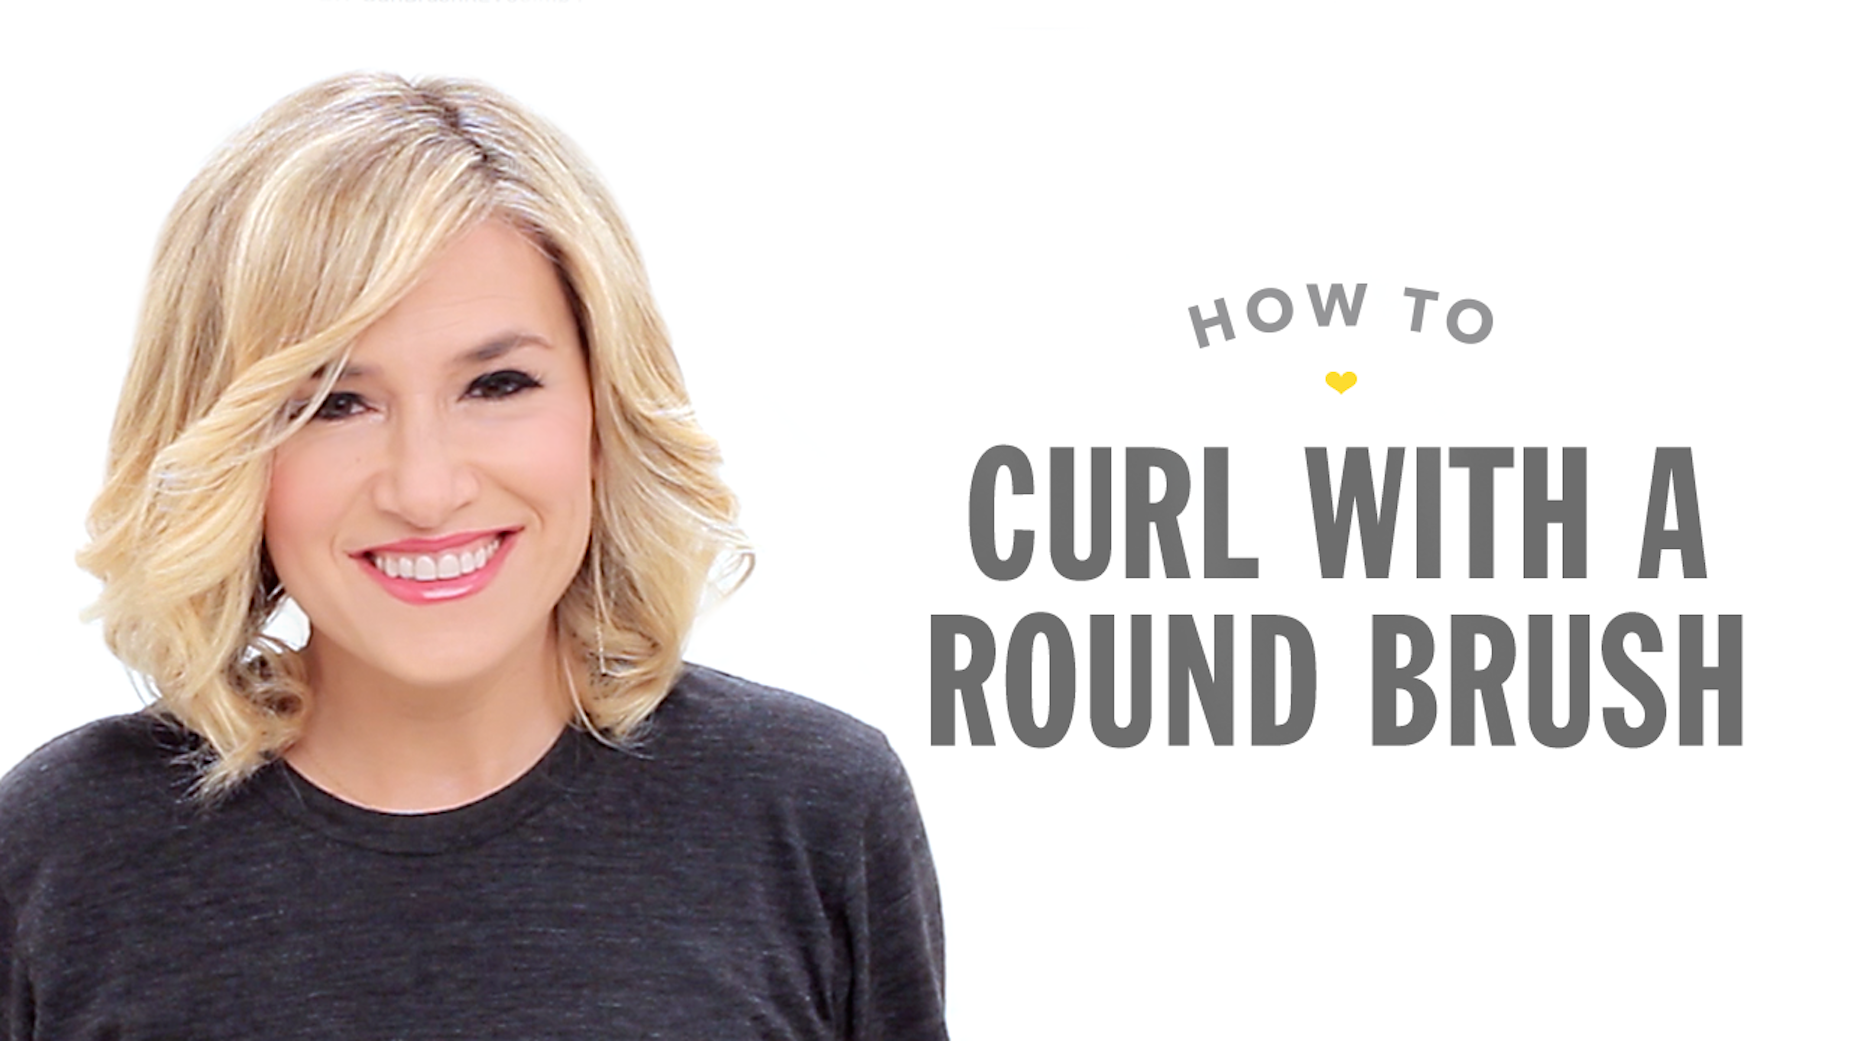 Video - How To Curl Hair With a Round Brush | Drybar